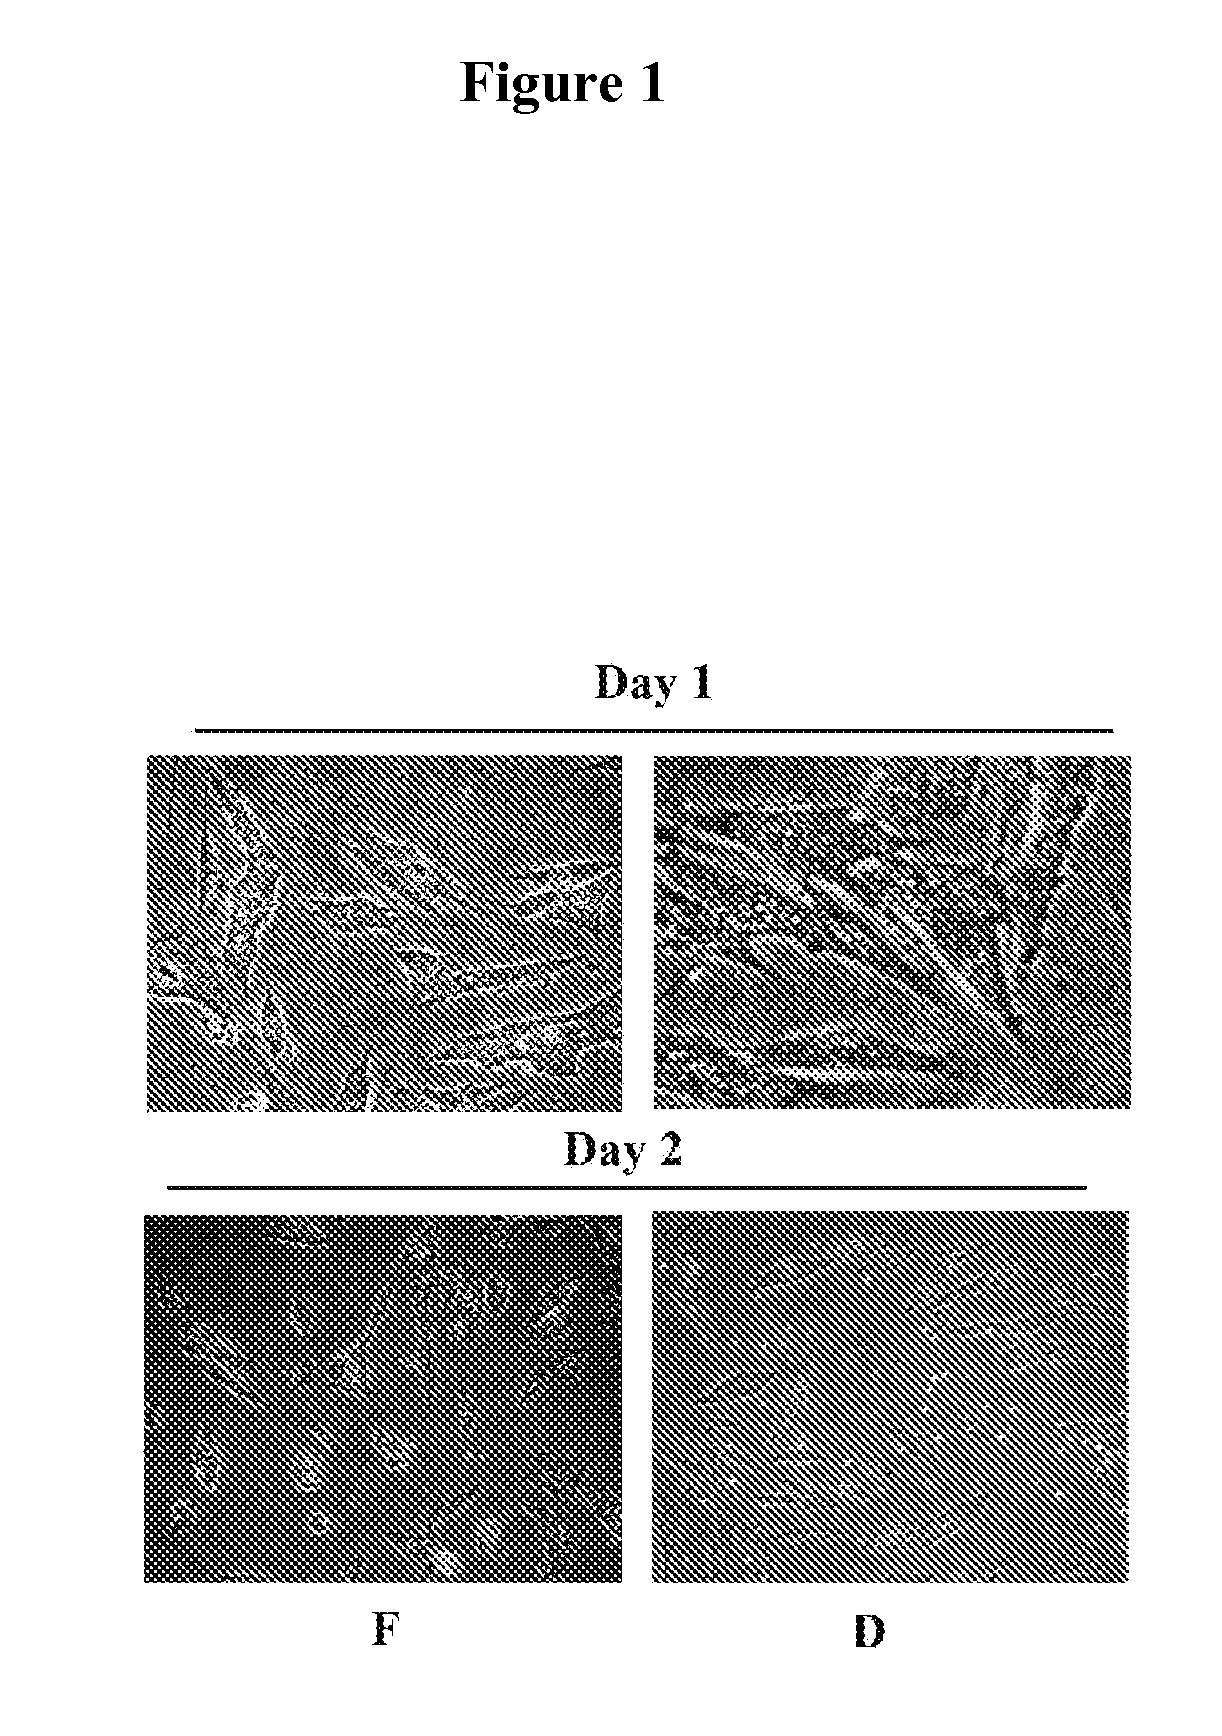 Method and composition for restoration of age-related tissue loss in the face or selected areas of the body